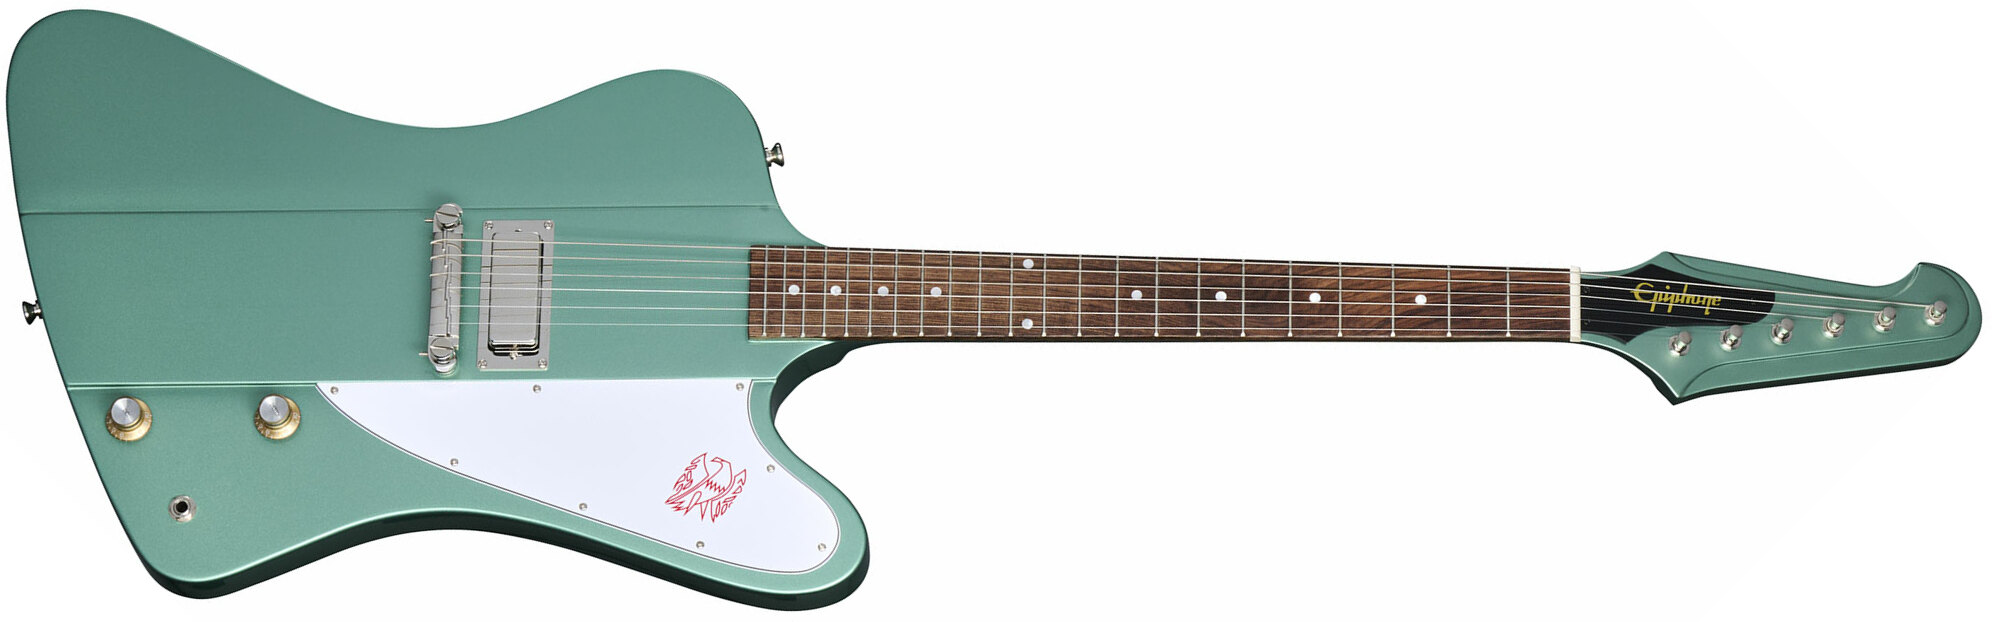 Epiphone Firebird I 1963 Inspired By Gibson Custom 1mh Ht Lau - Inverness Green - Guitare Électrique RÉtro Rock - Main picture